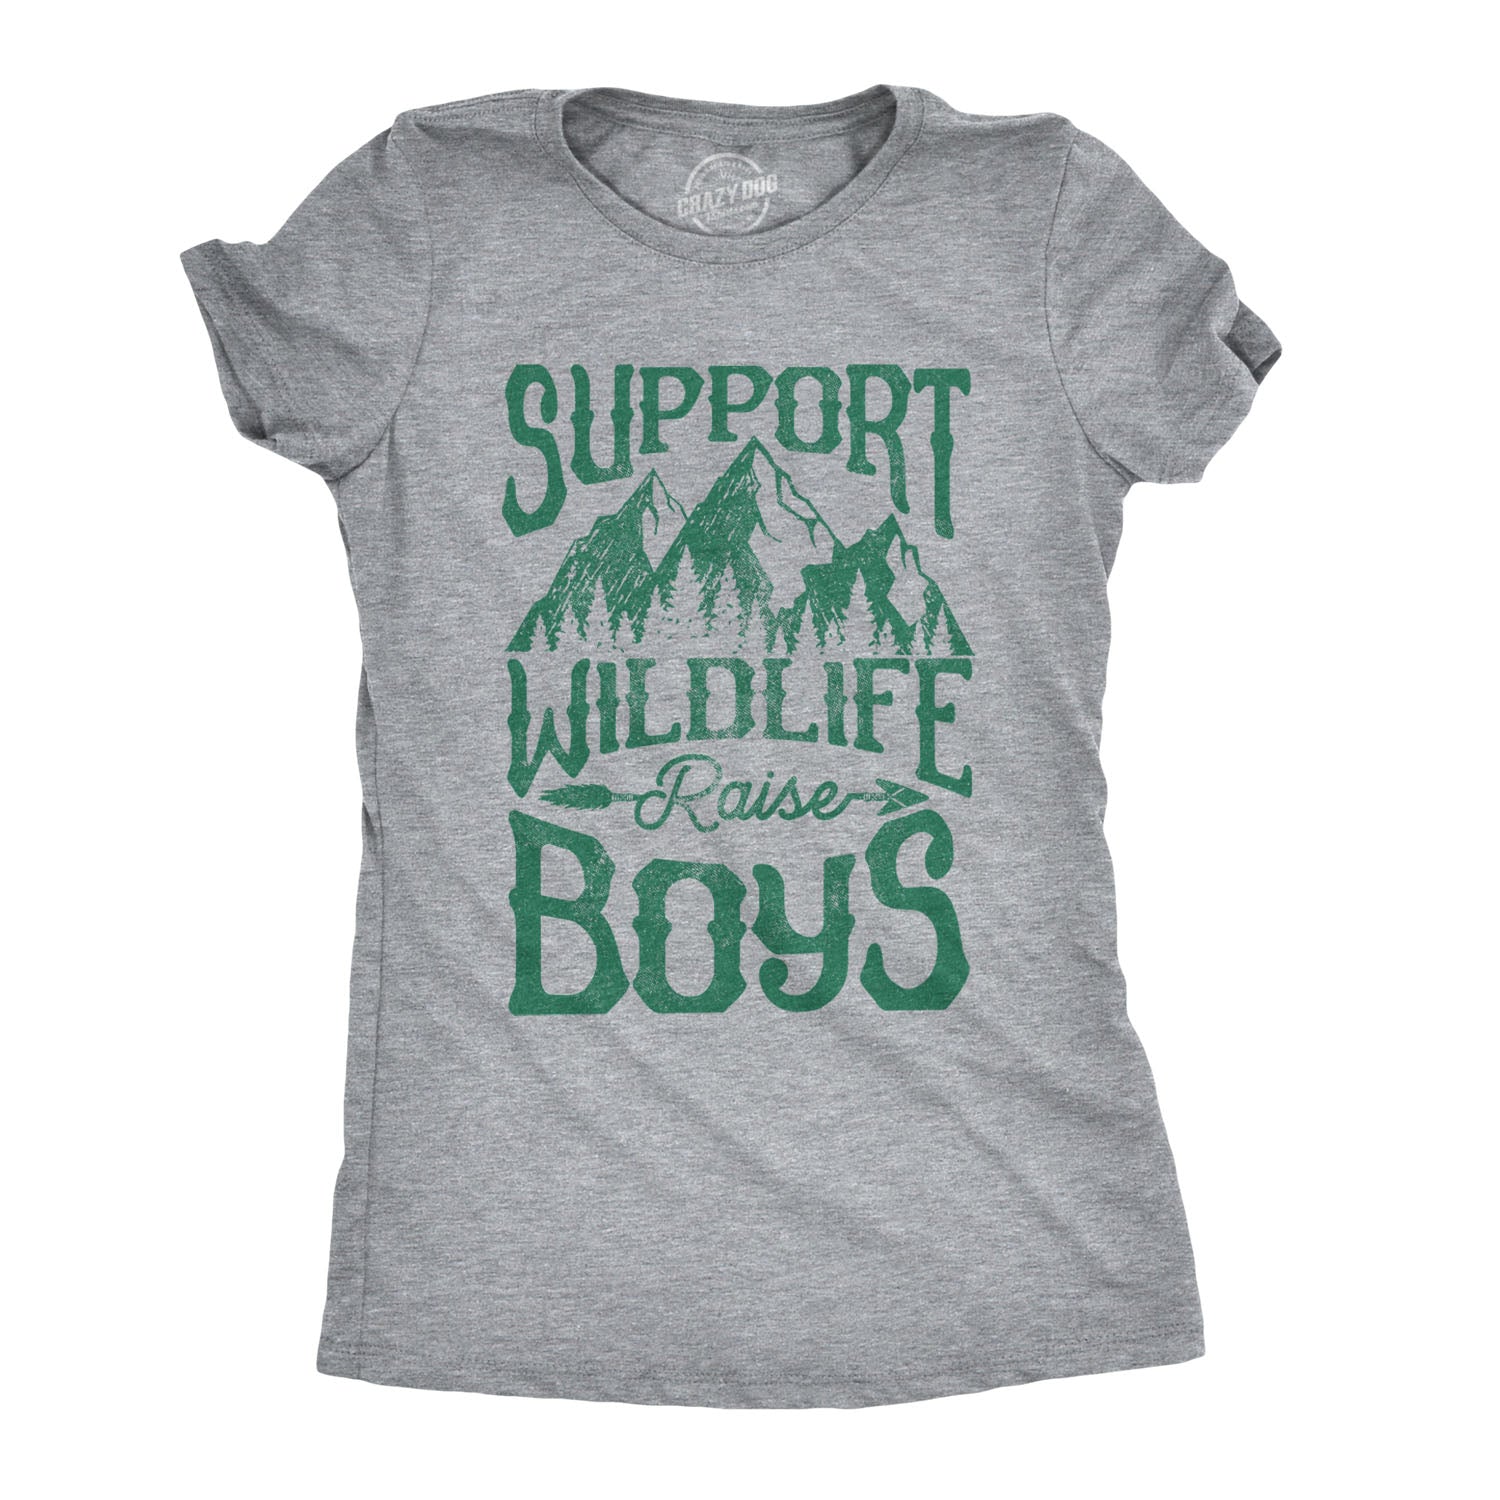 Funny Light Heather Grey - Wildlife Boys Support Wildlife Raise Boys Womens T Shirt Nerdy Mother's Day Camping Tee